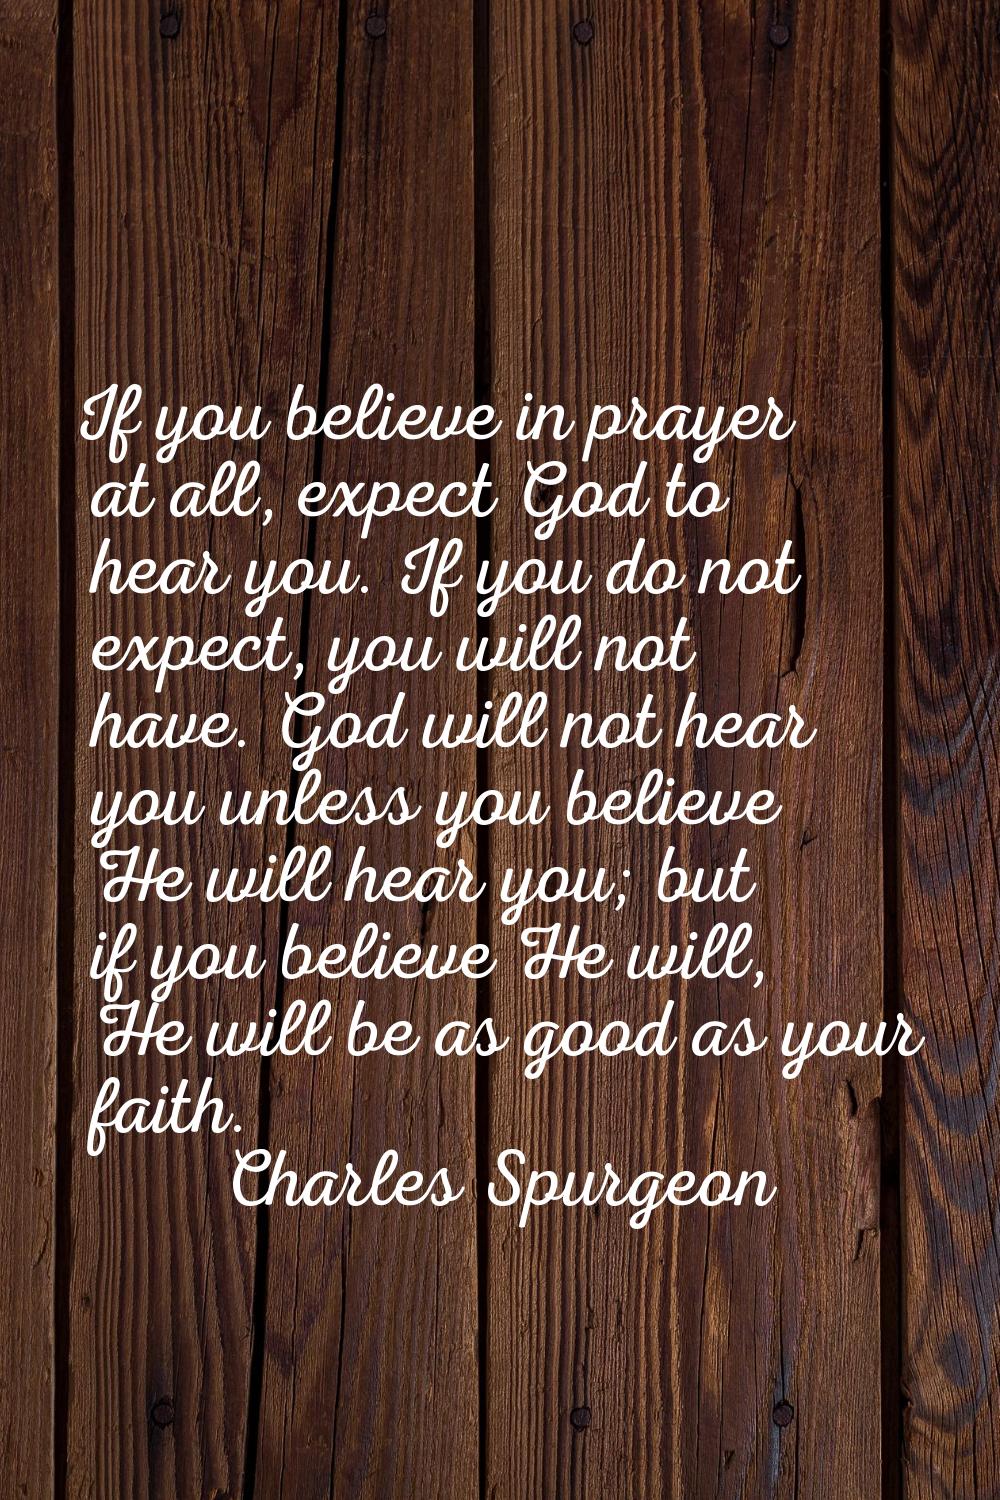 If you believe in prayer at all, expect God to hear you. If you do not expect, you will not have. G